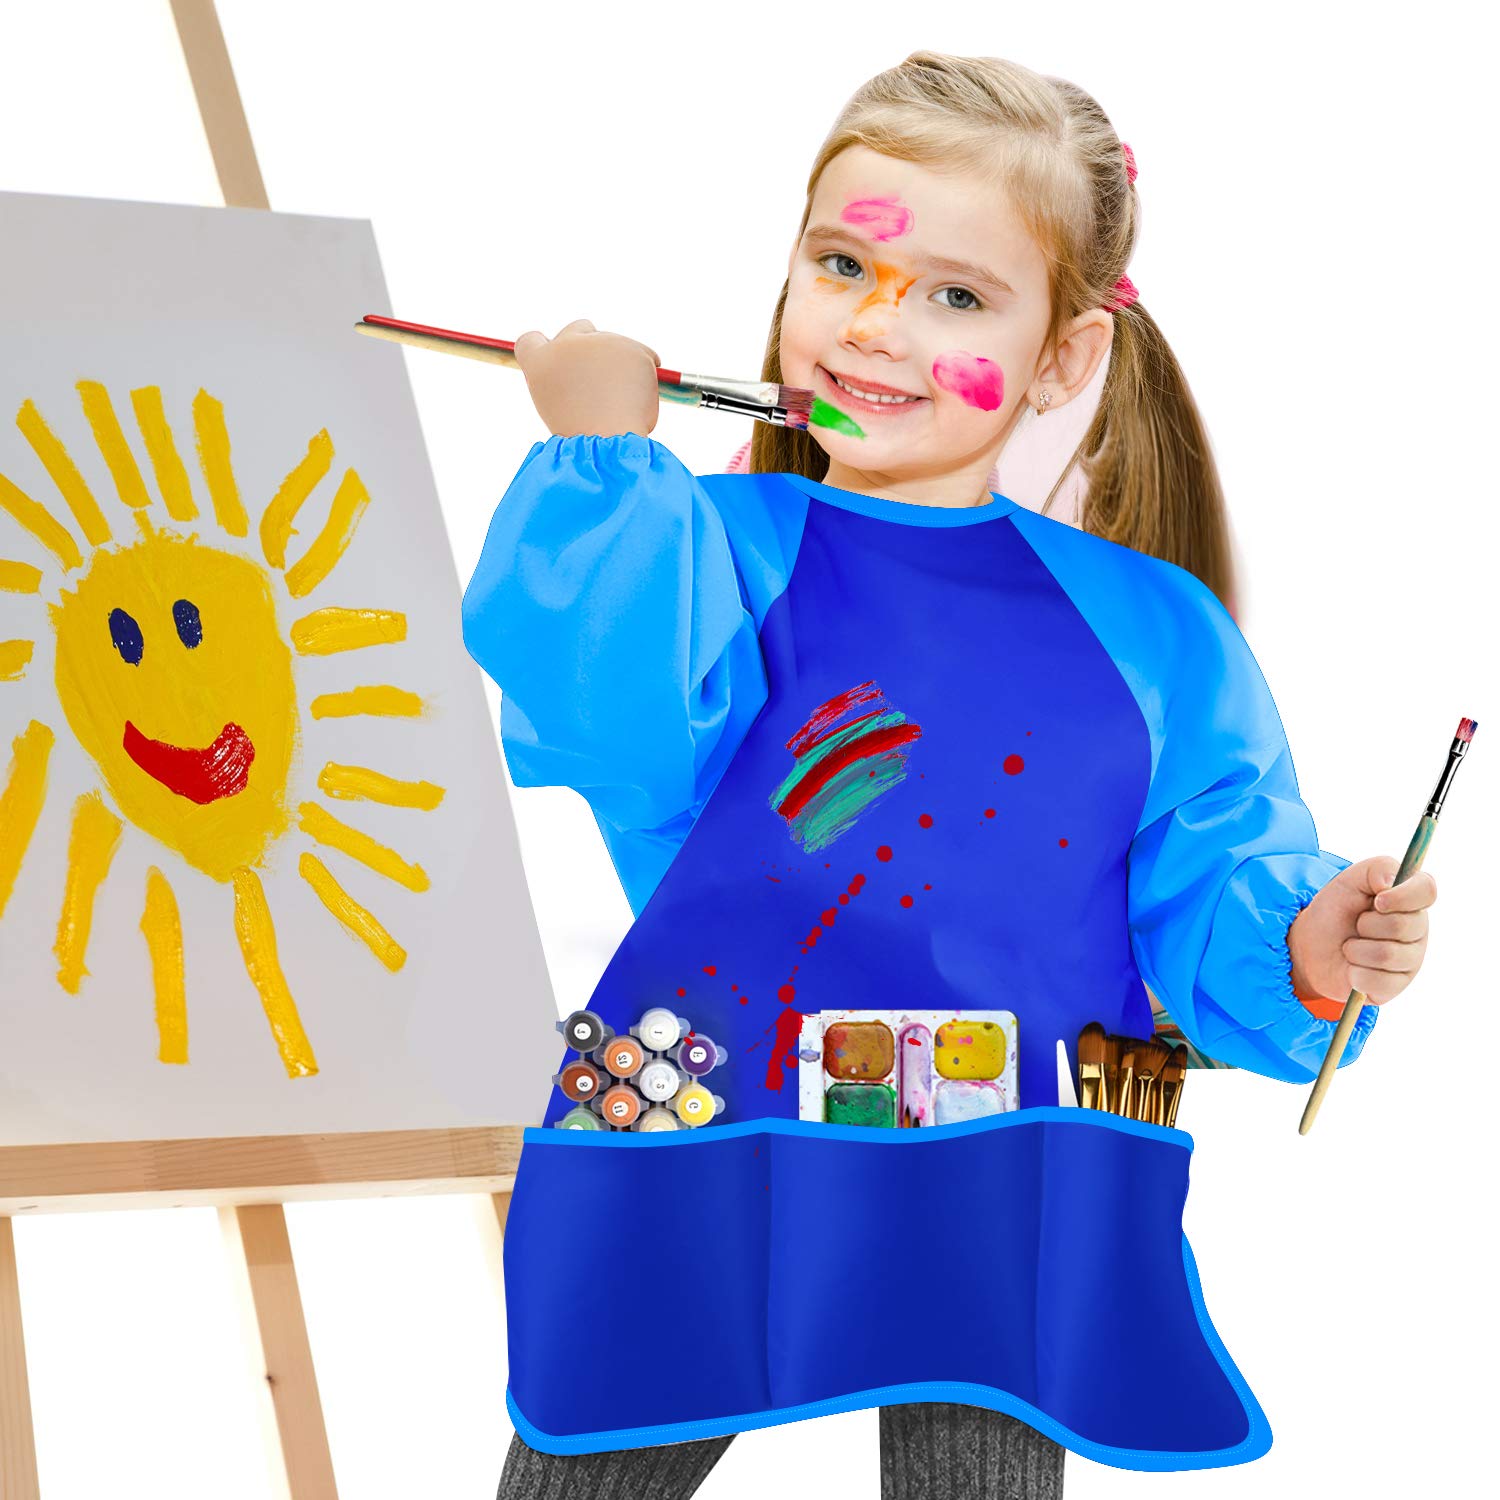 KUUQA Waterproof Children Art Smock Kids Art Aprons with 3 Roomy Pockets,Painting Supplies (Paints and brushes not included)